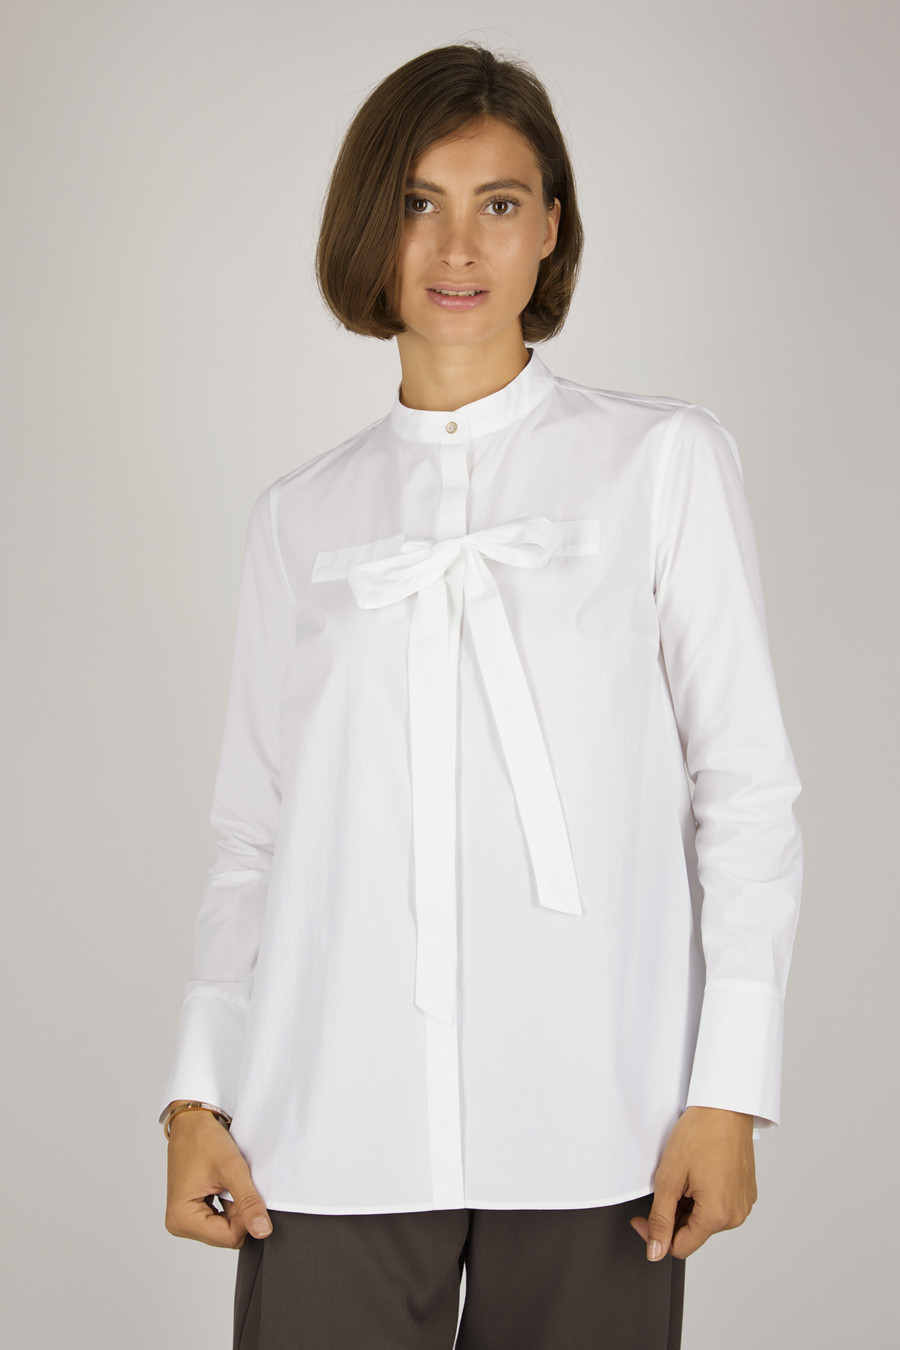 EVE – Blouse with stand-up collar and binding element – Color: White